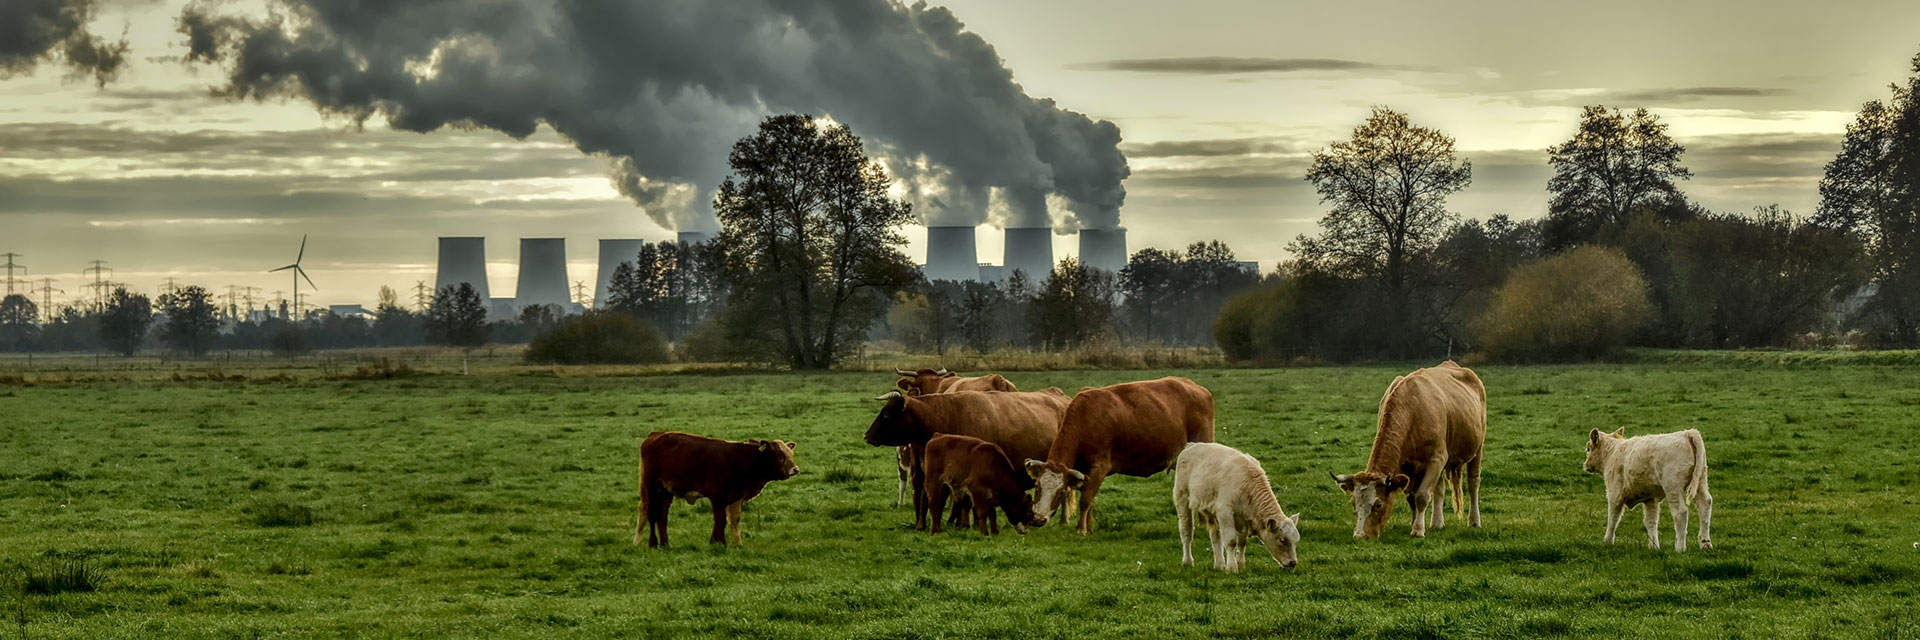 Grazing cows on a green field in front of an industrial plant.